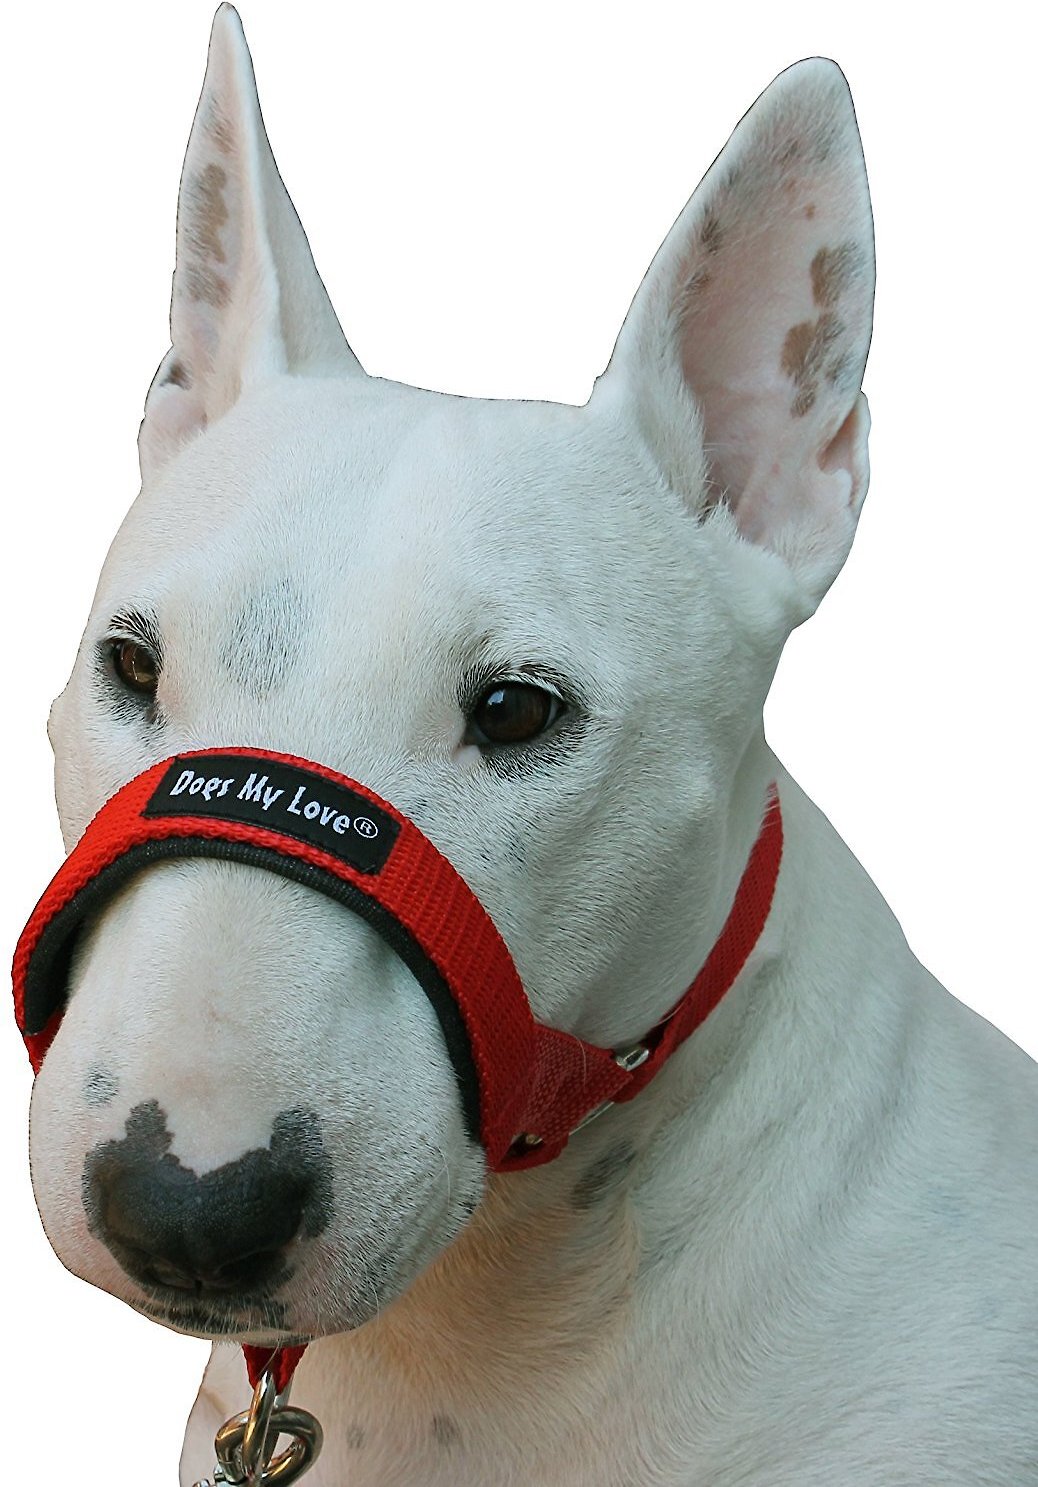 Dogs My Love Halter Dog Head Collar, Red, XX-Large - Chewy.com